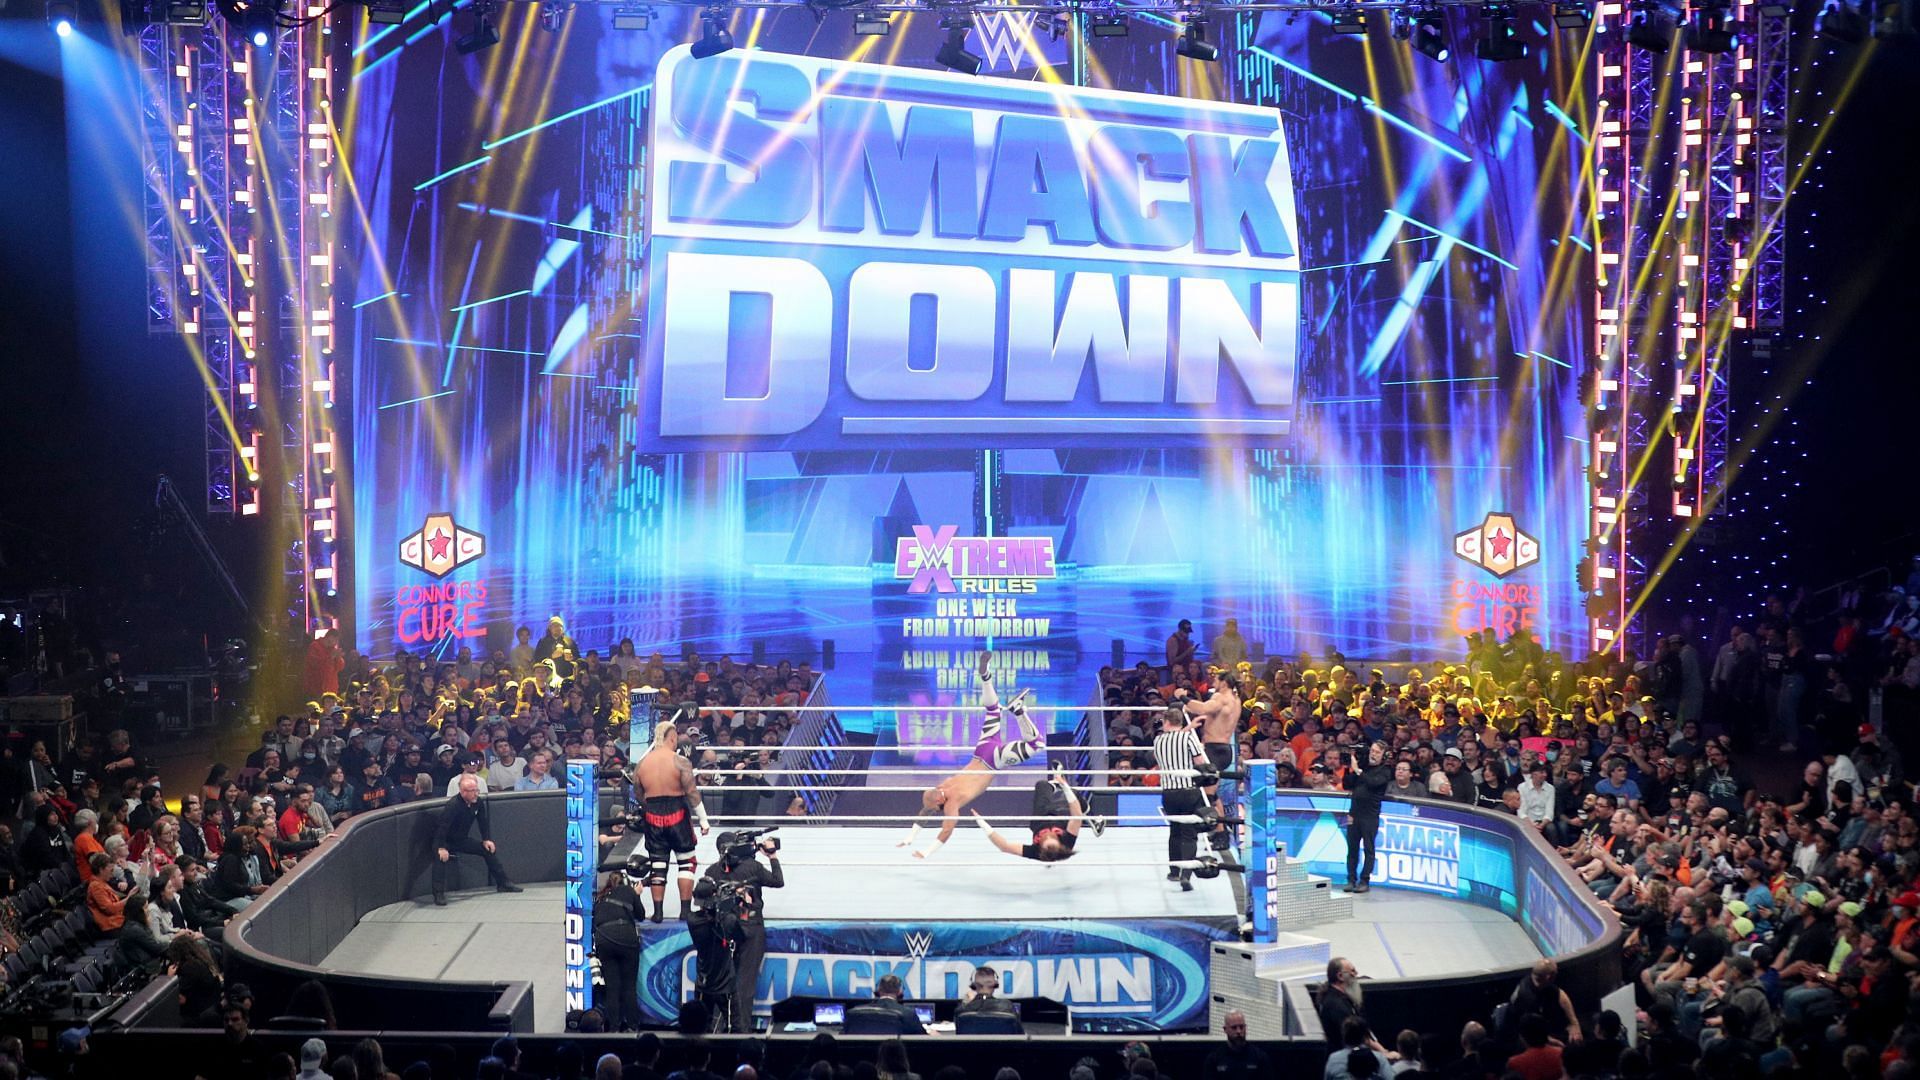 The SmackDown arena